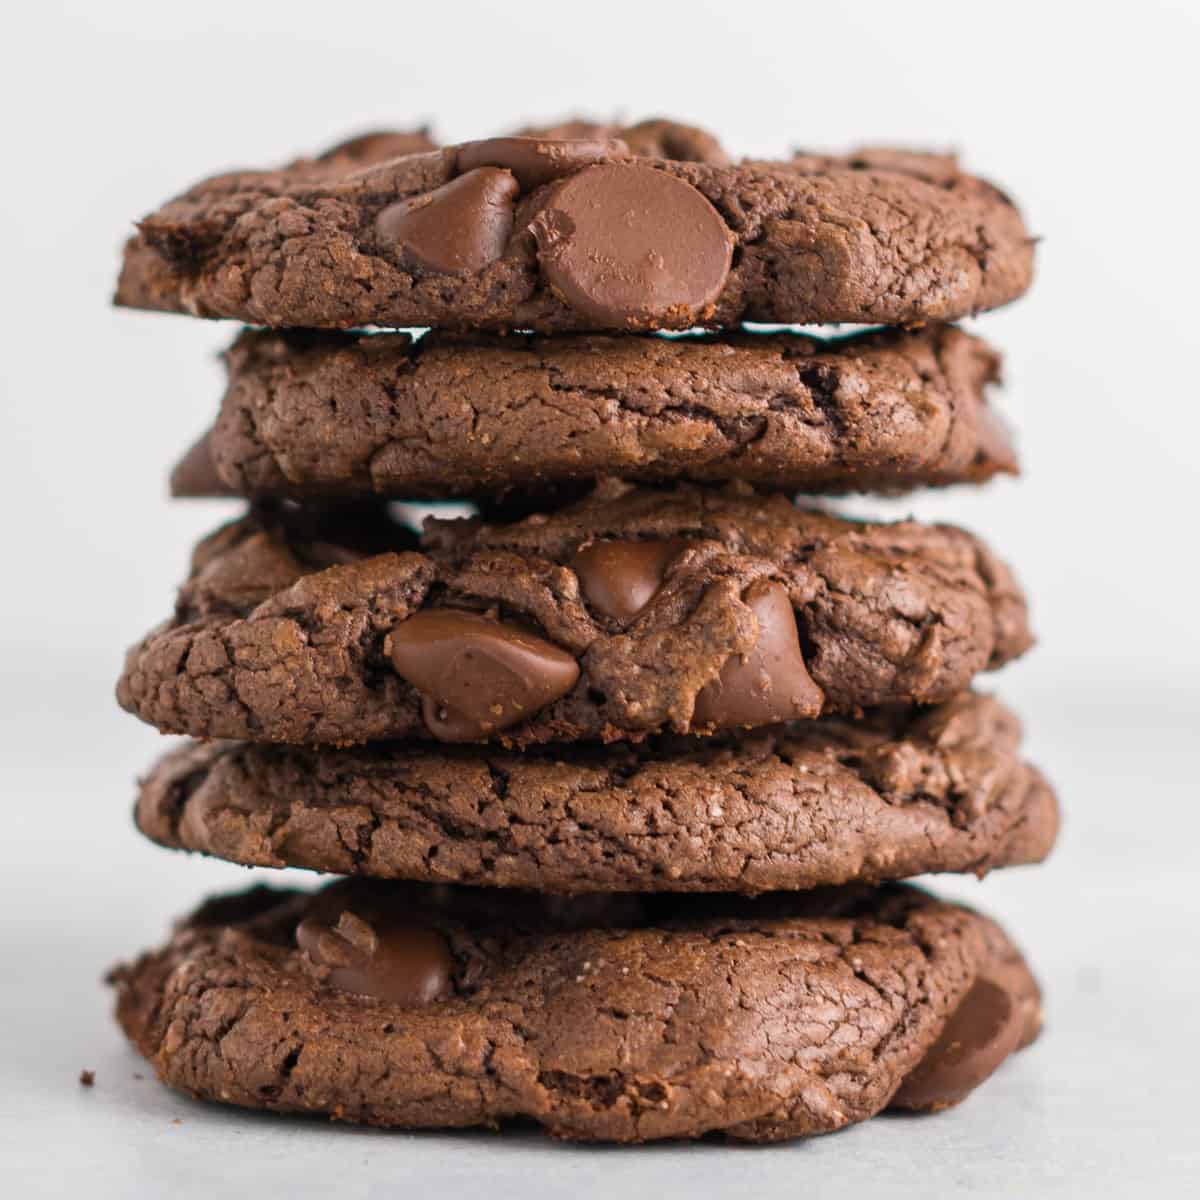 stacked chocolate cake mix cookies